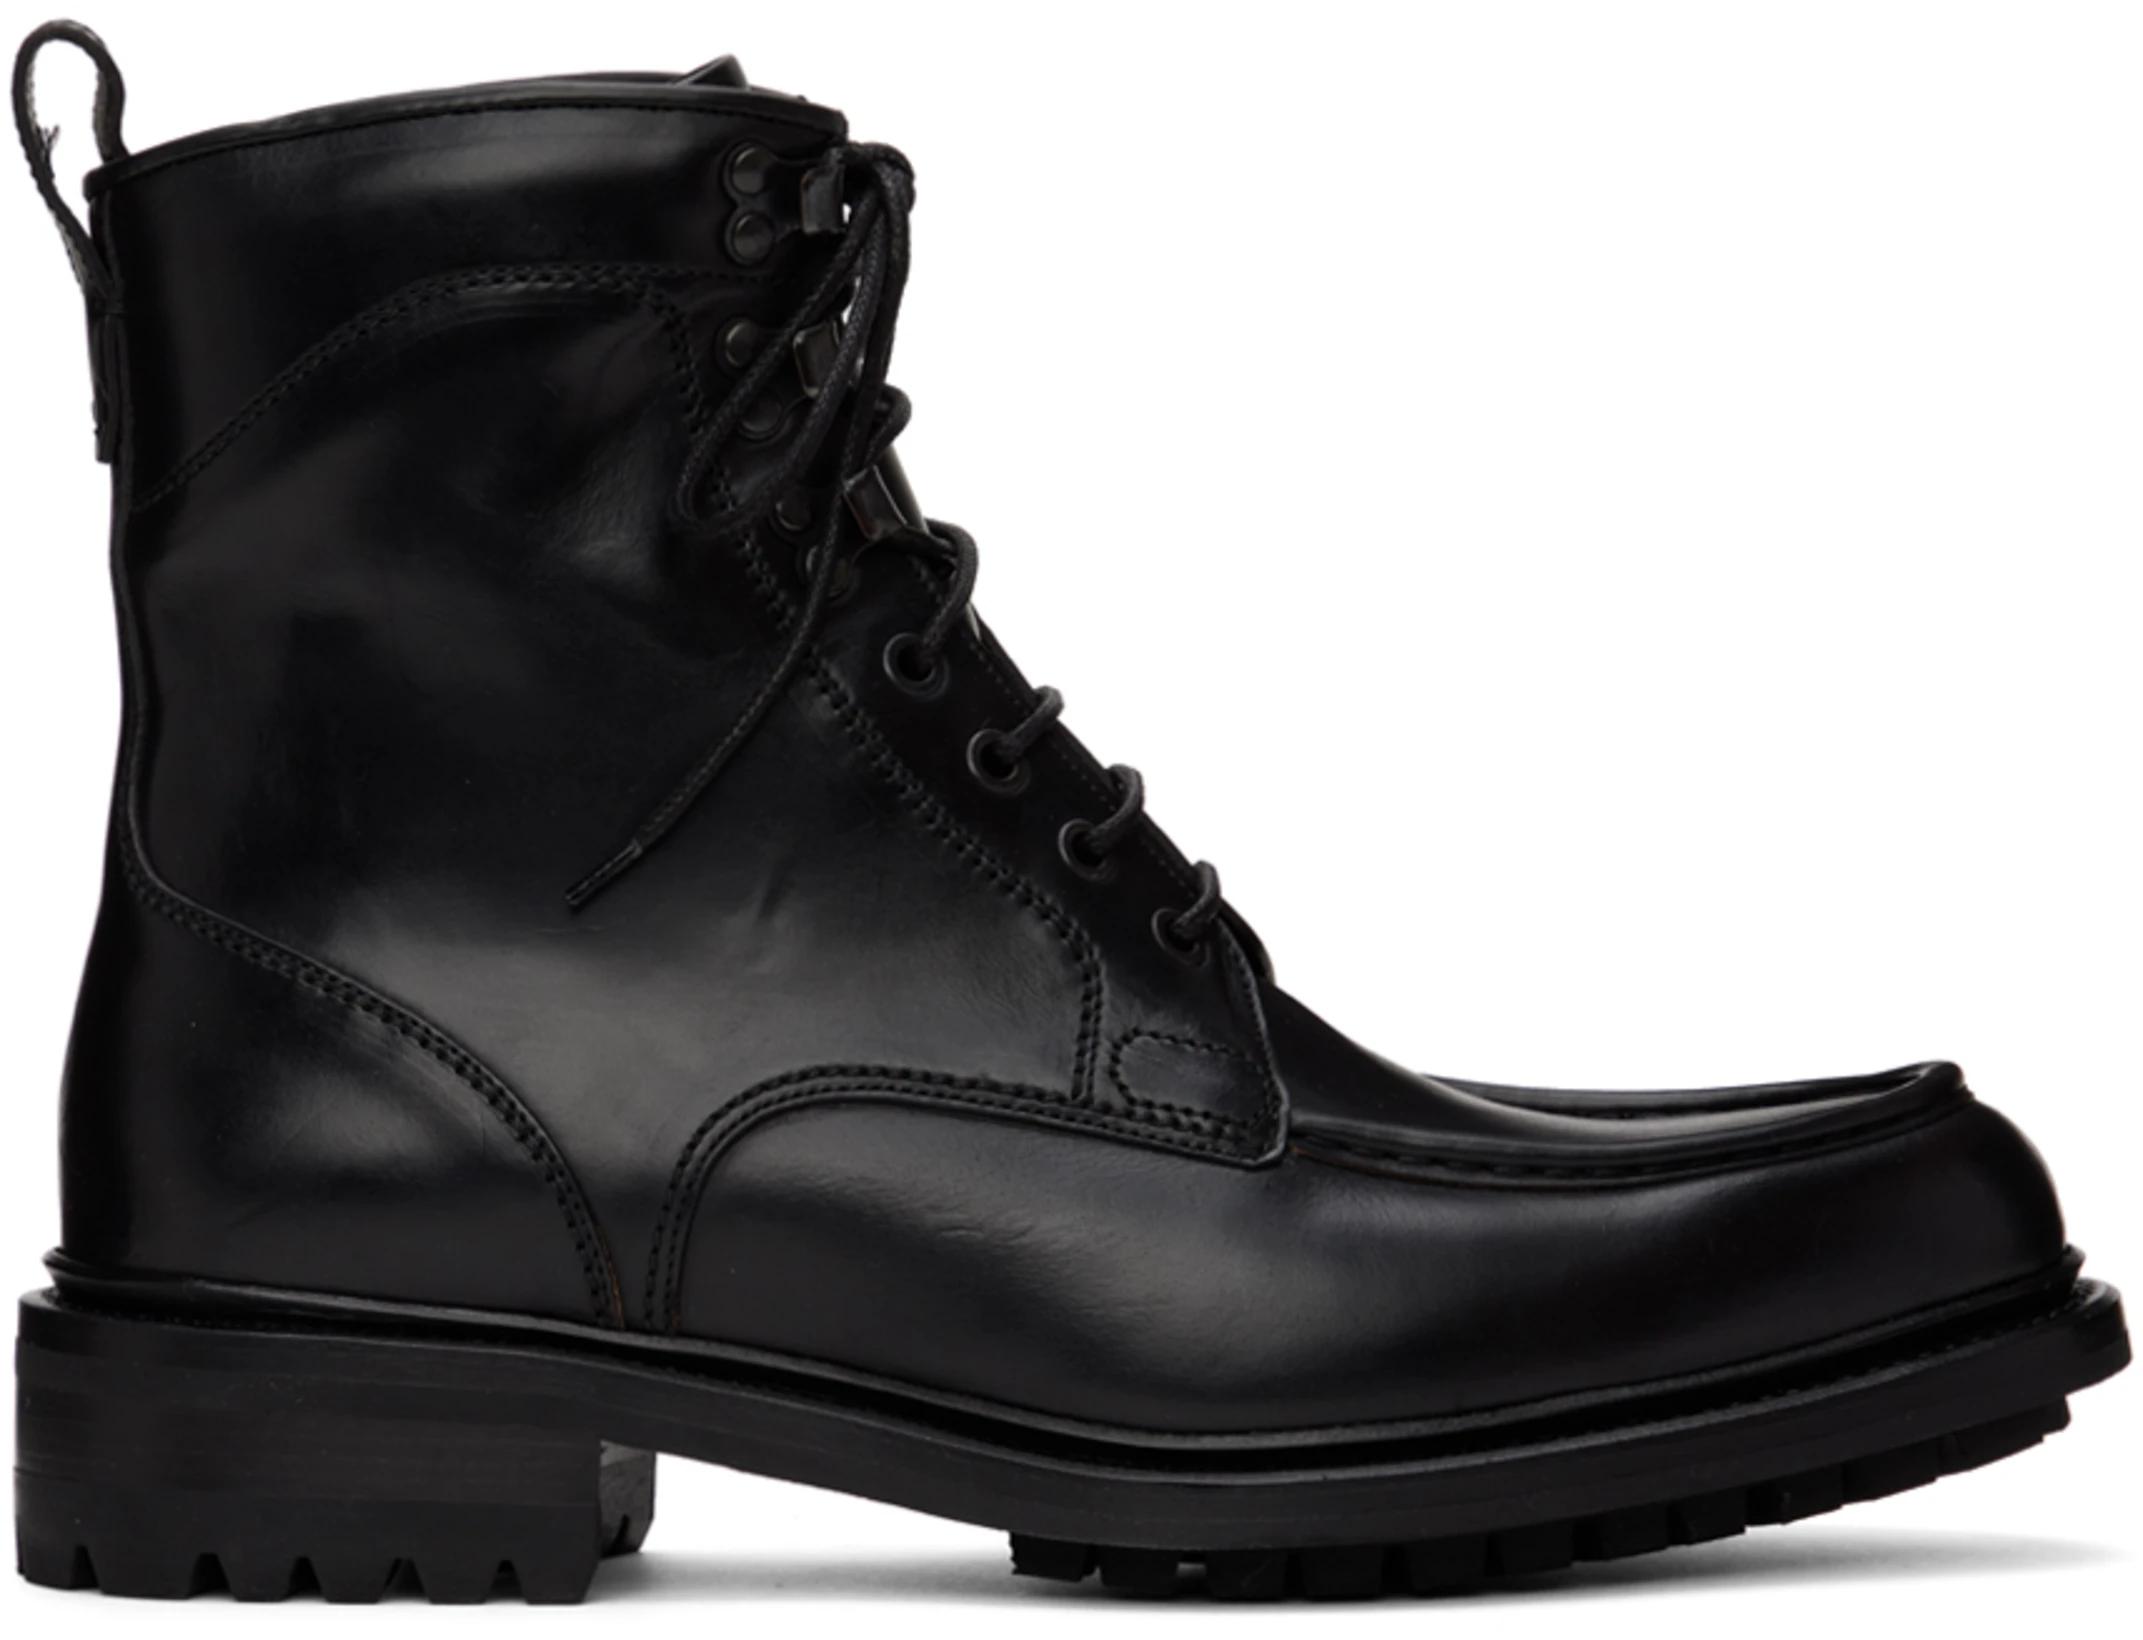 Black Leather Boots by BRIONI